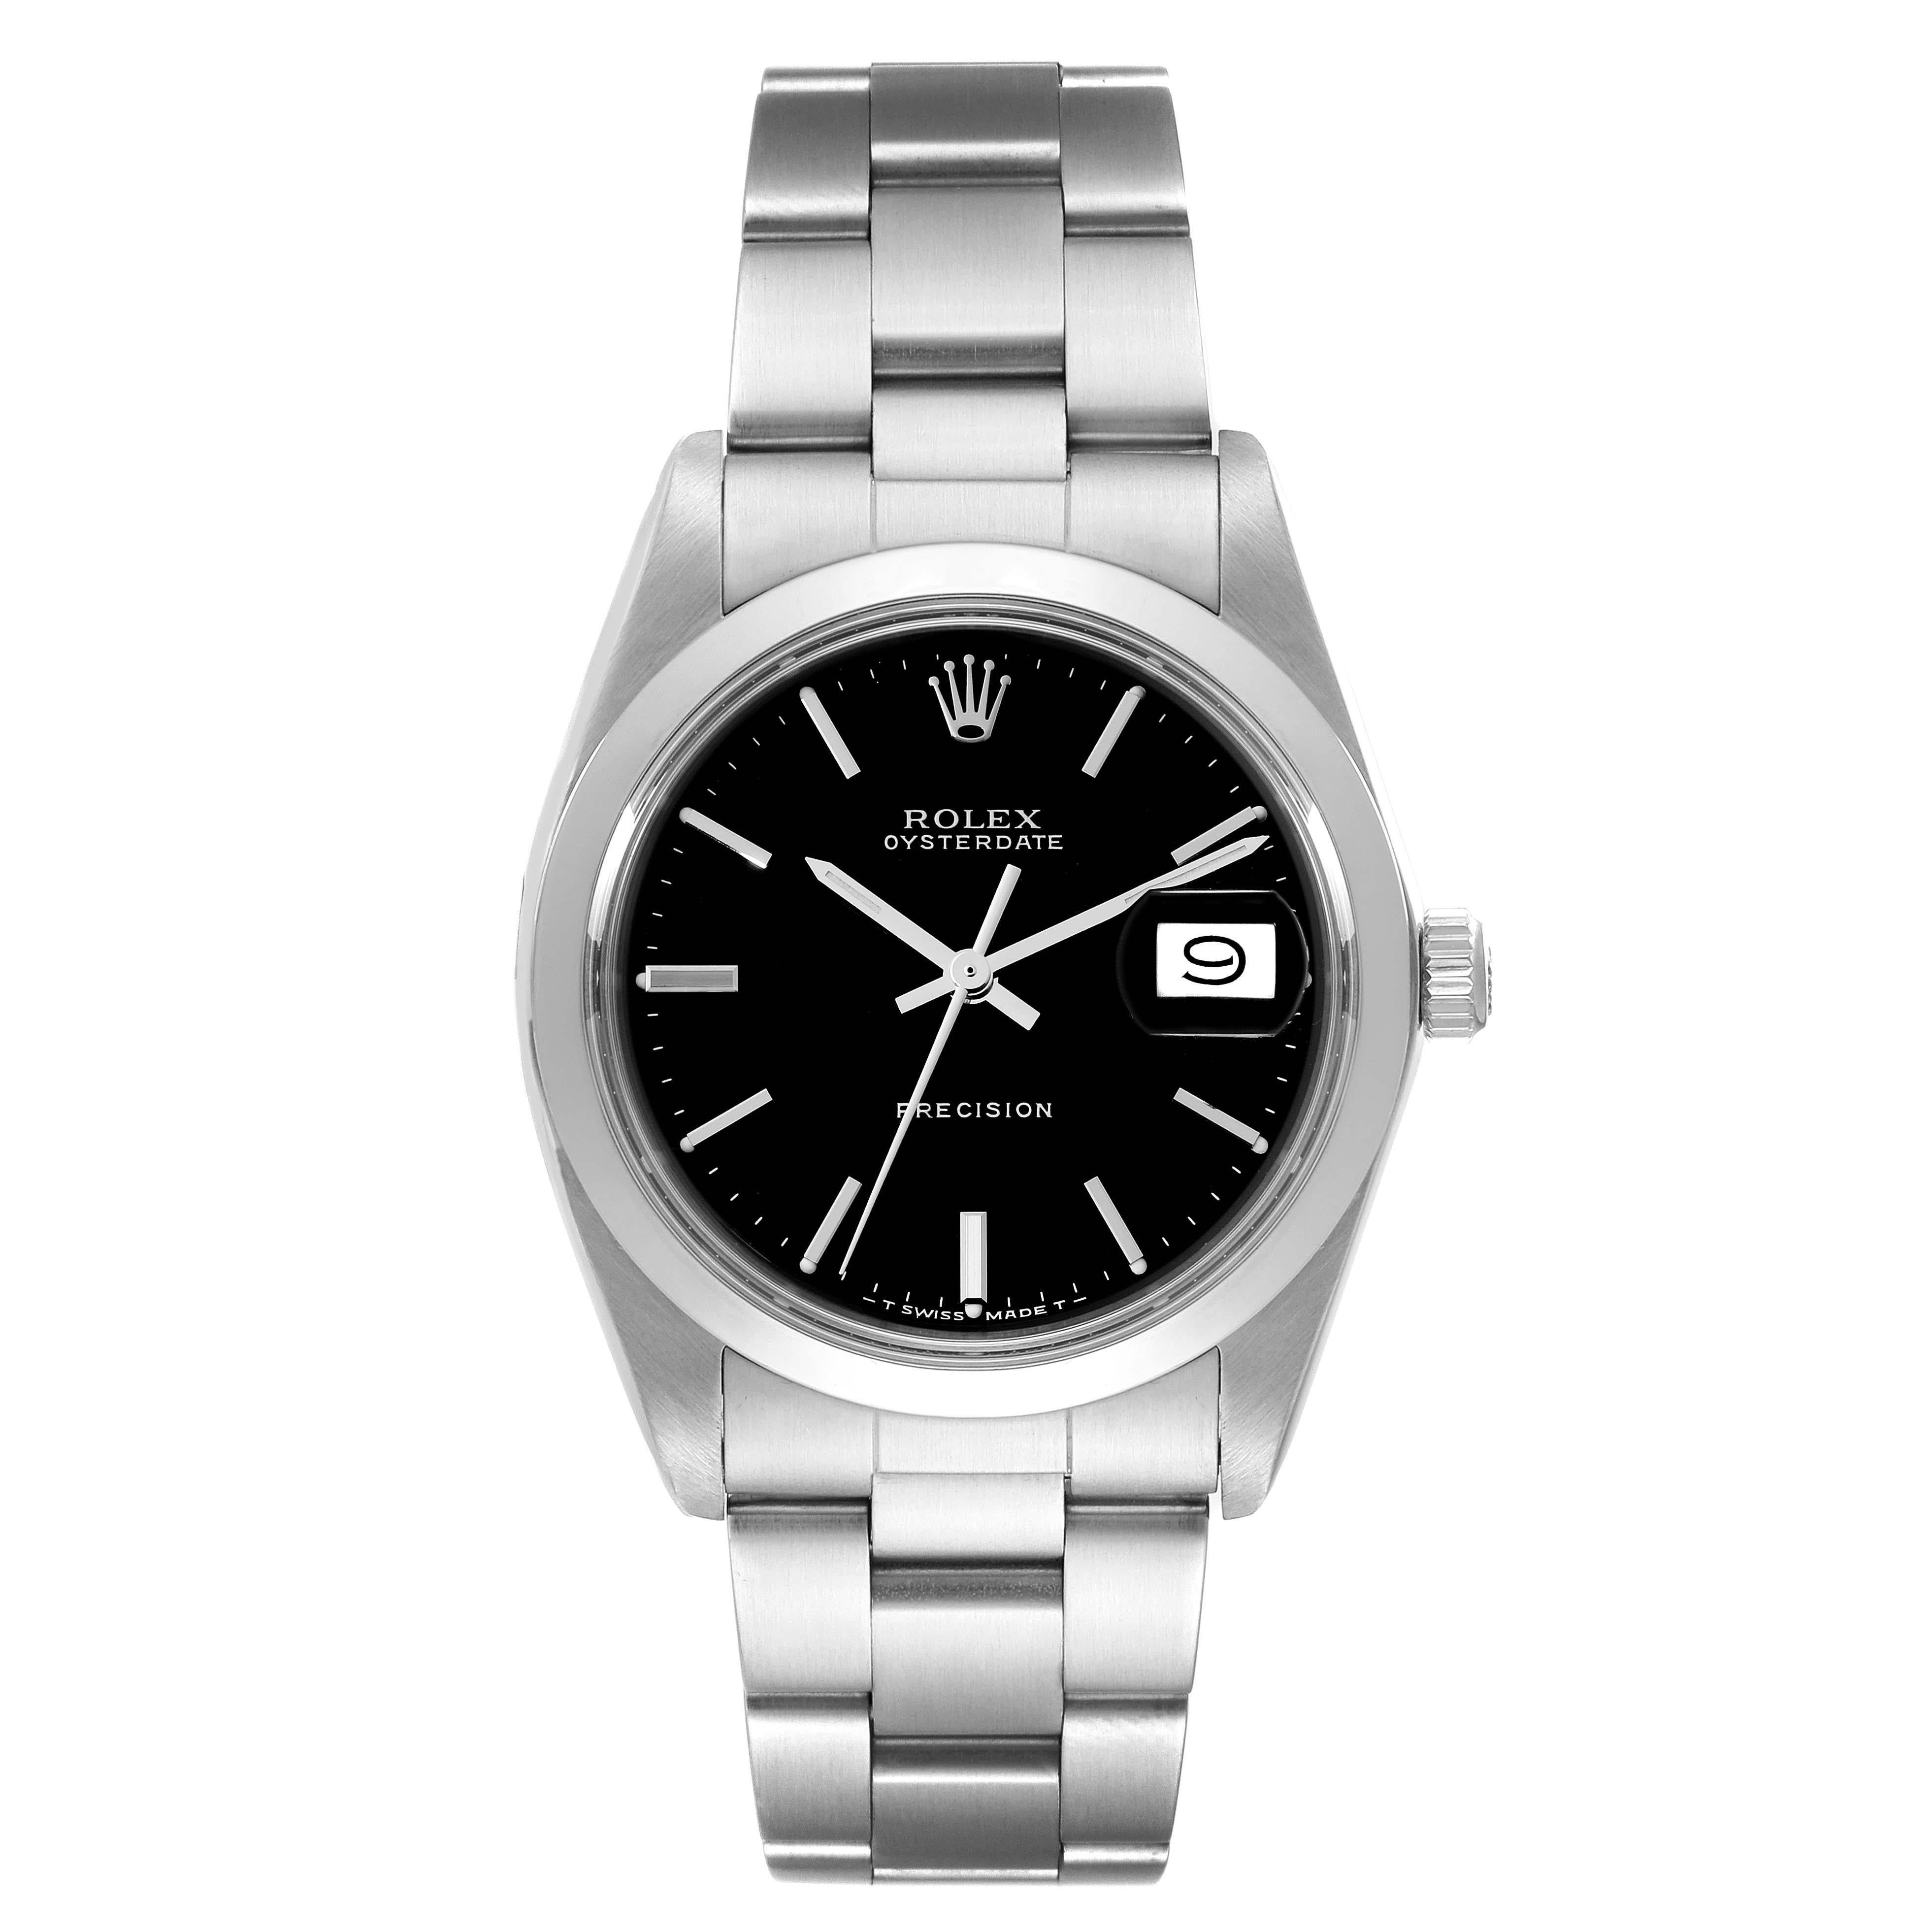 Rolex OysterDate Precision Black Dial Steel Vintage Mens Watch 6694. Manual-winding movement. Stainless steel oyster case 35.0 mm in diameter. Rolex logo on the crown. Stainless steel smooth bezel. Acrylic crystal with cyclops magnifier. Black dial